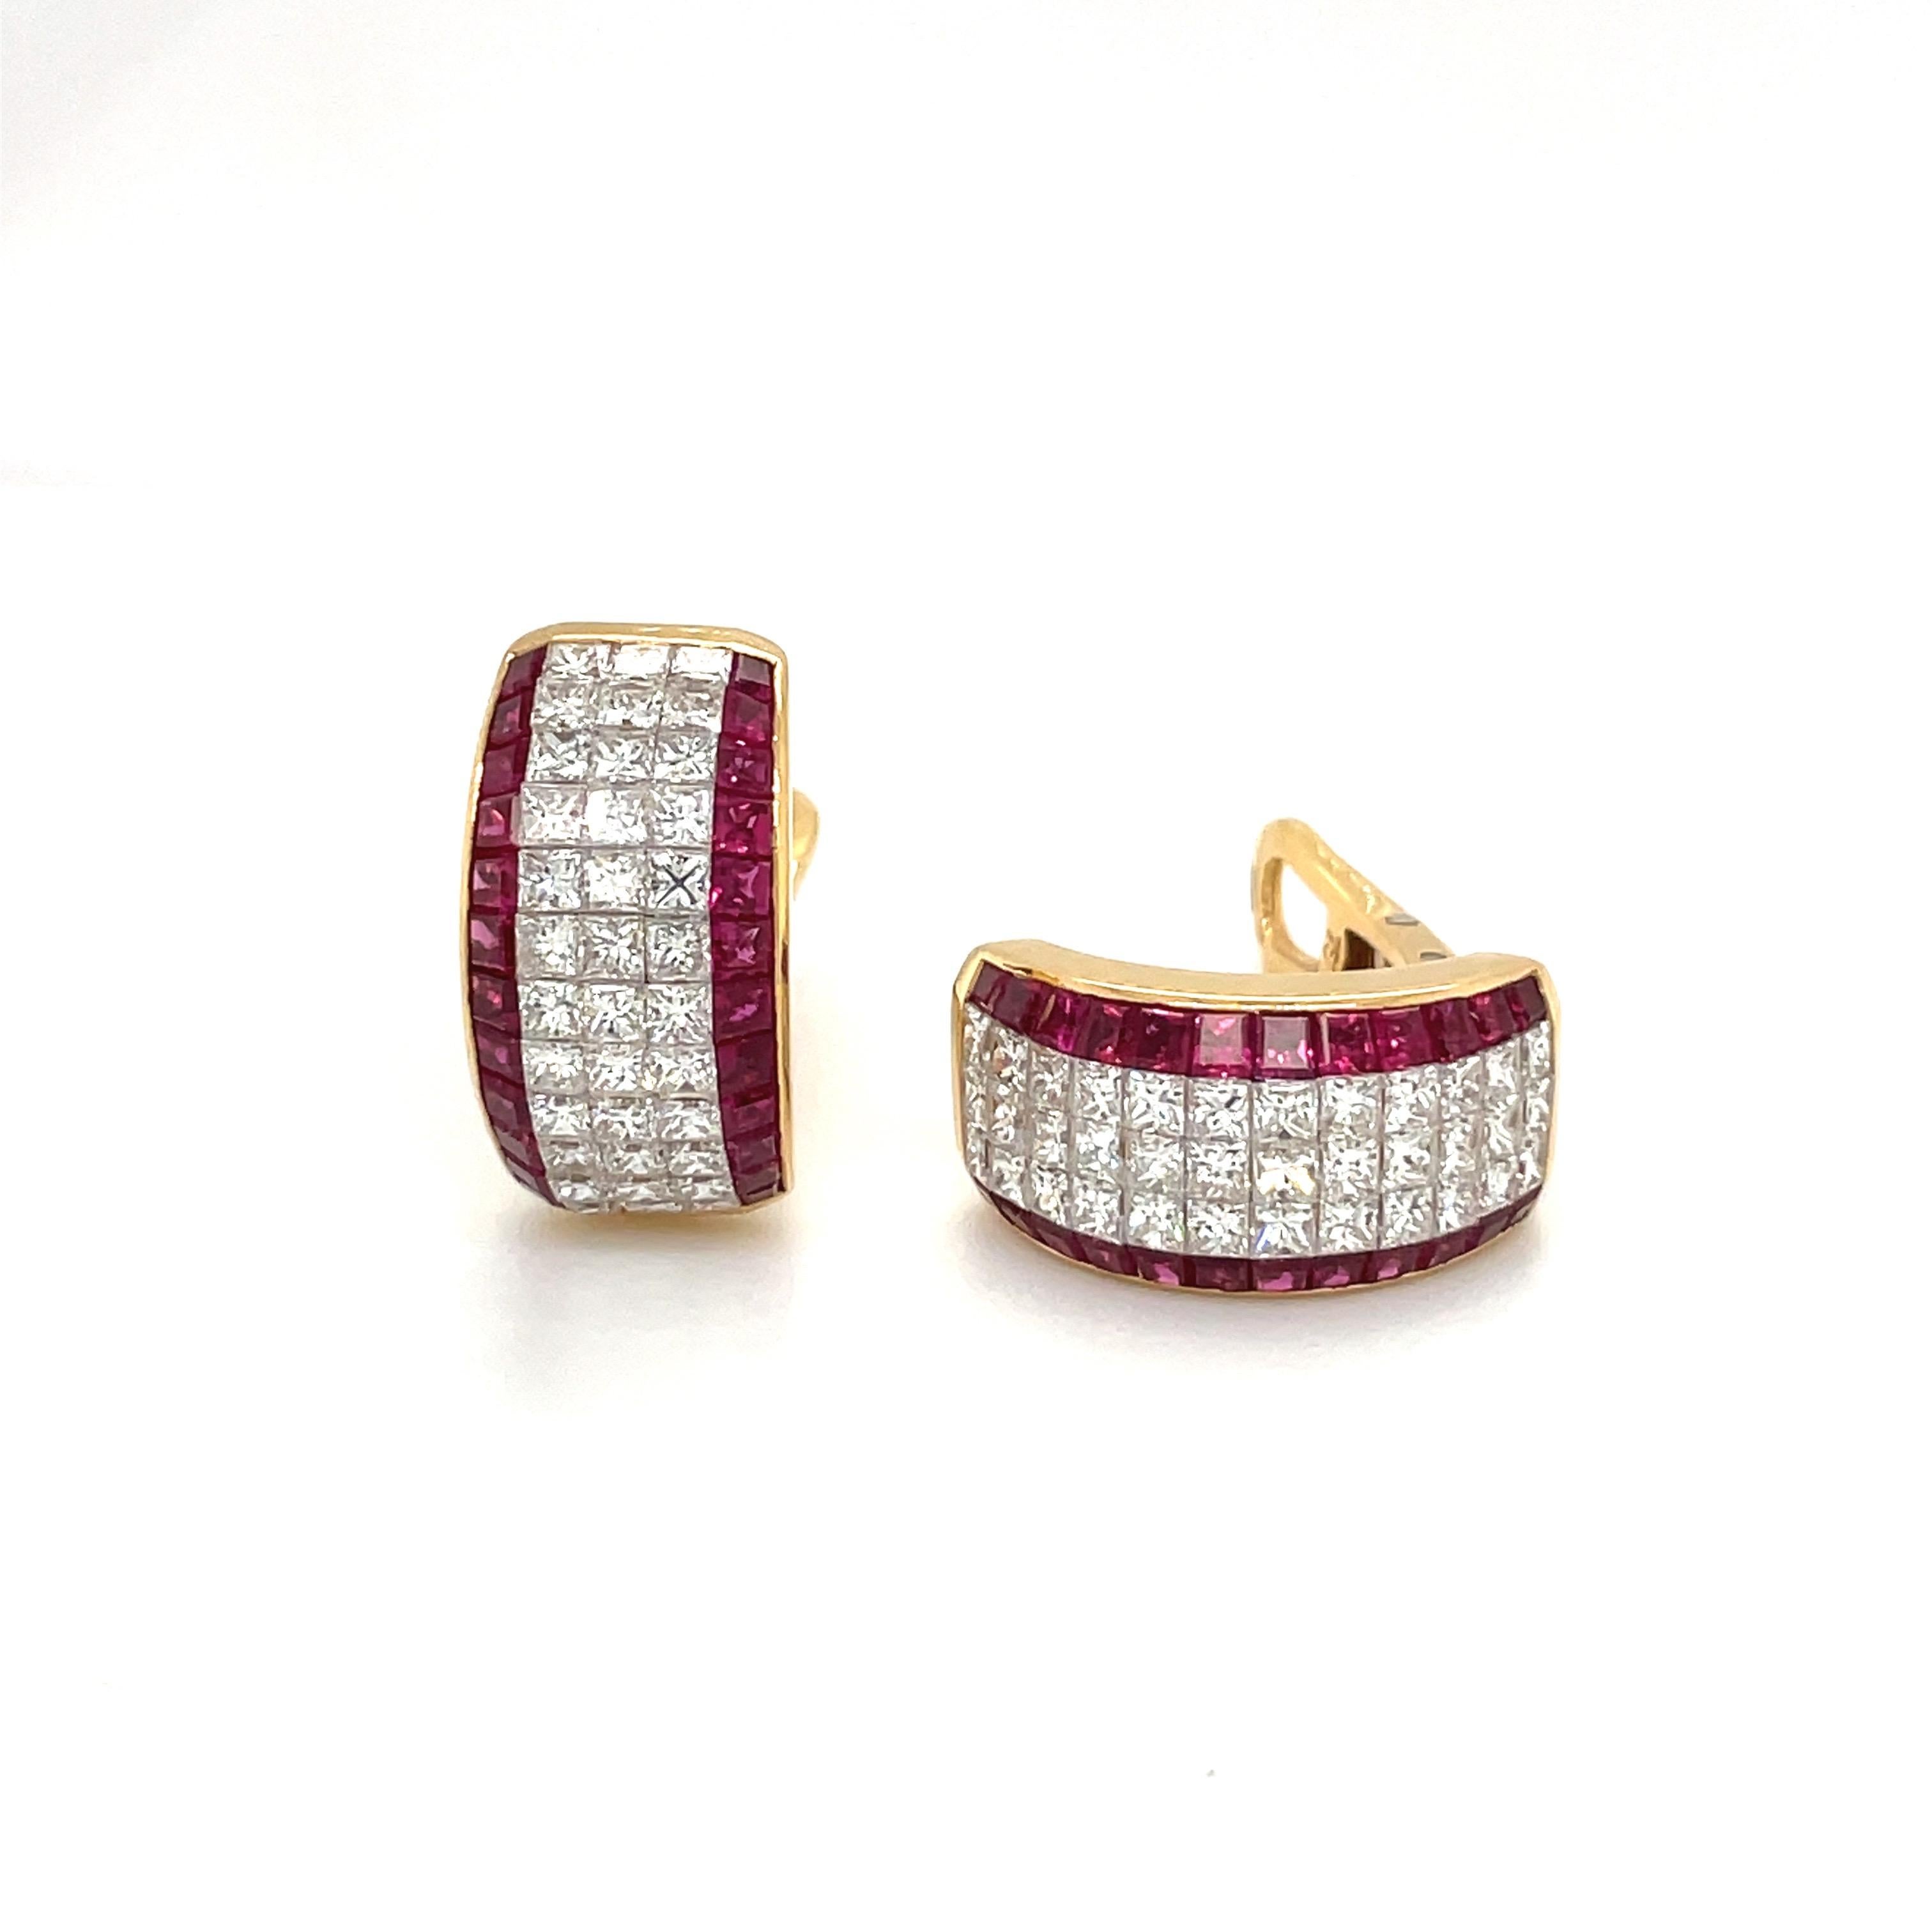 A very classic pair of half hoop earrings. These 18 karat yellow gold earrings are invisibly set with 3 rows of princess cut diamonds. The diamonds are bordered on either side by a row of square cut rubies. The earrings measure 3/4